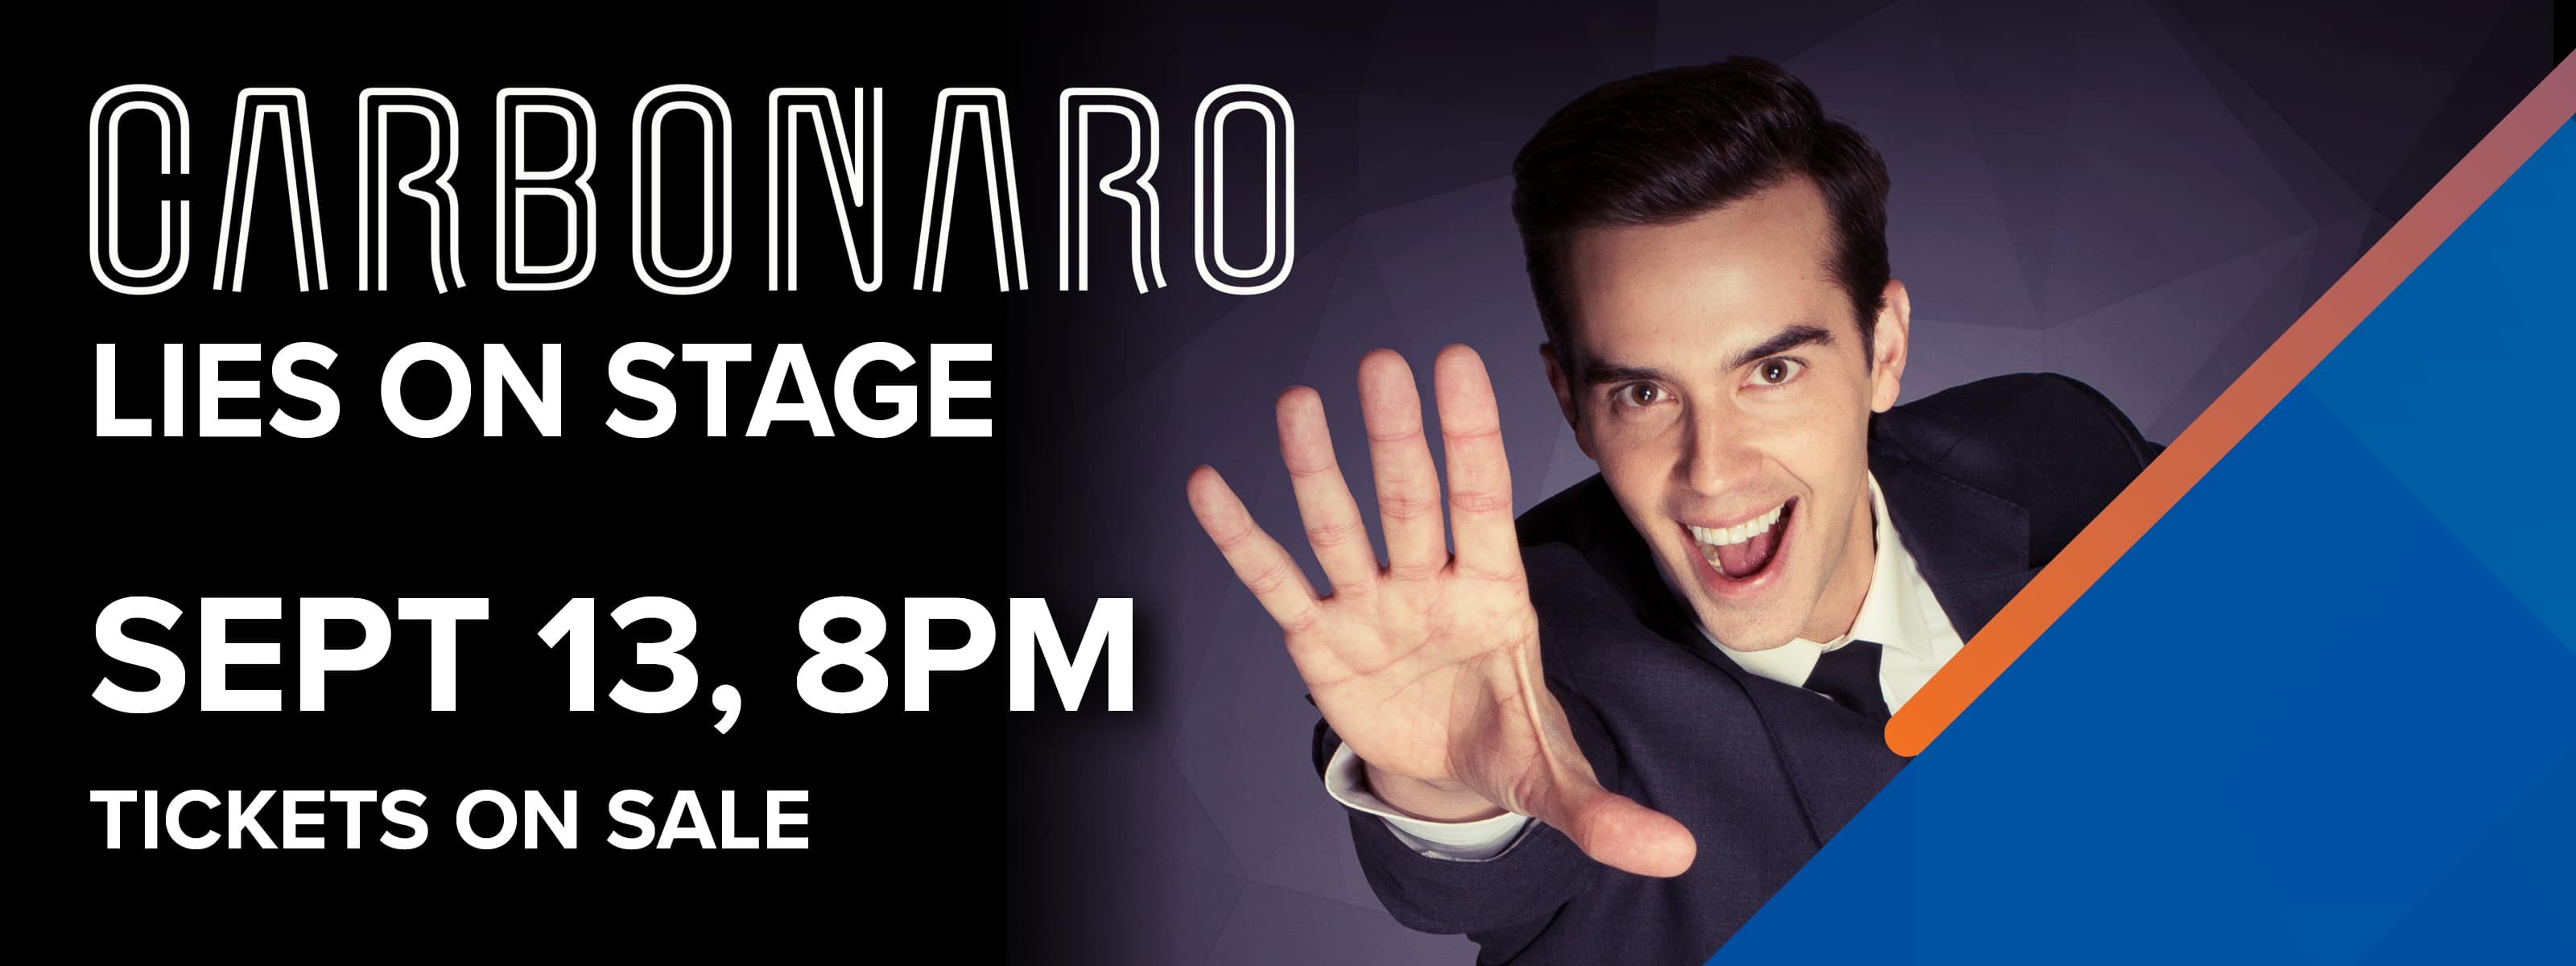 CARBONARO: LIES ON STAGE - September 13, 8:00pm Tickets On Sale Now